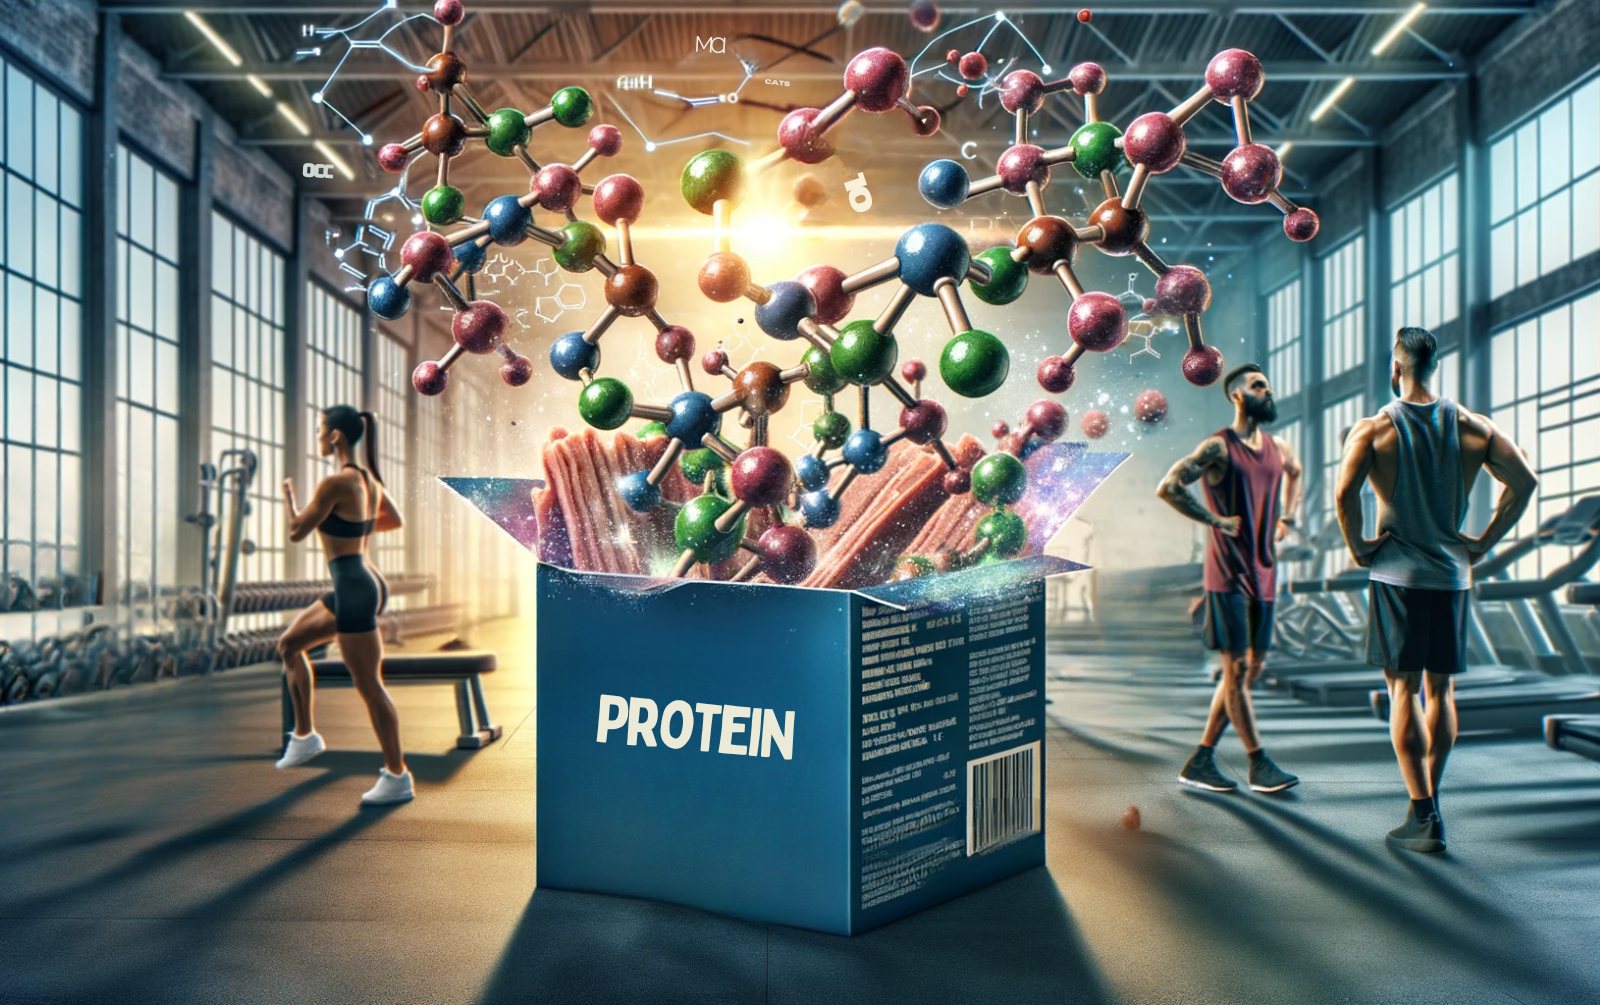 Can You Build Muscle Without Protein? – The Surprising Truth!